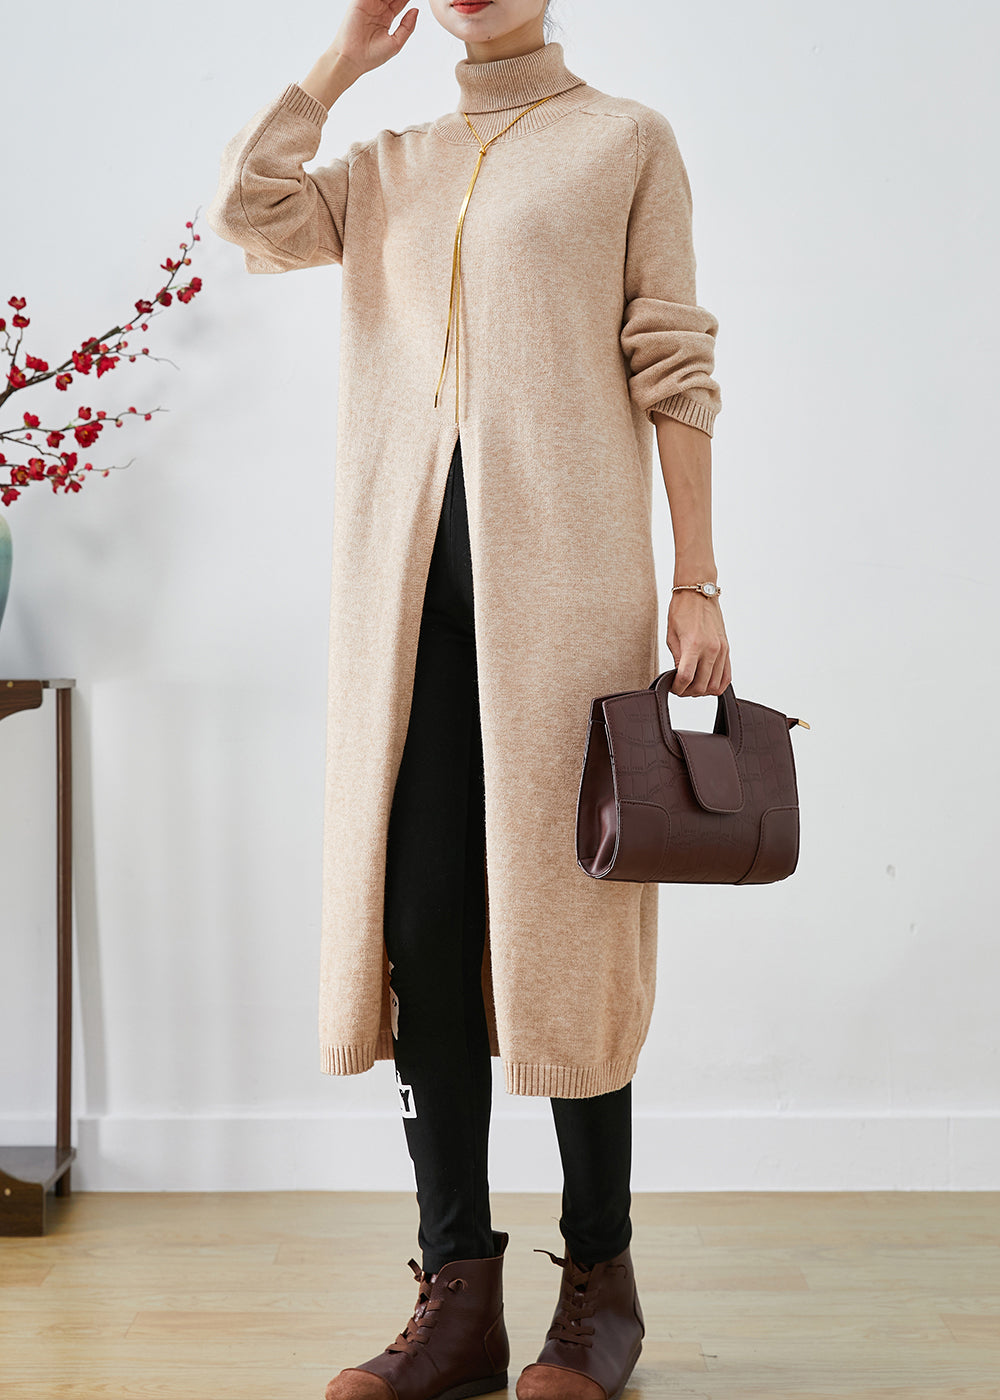 French Apricot Turtle Neck Side Open Knit Sweater Dress Fall